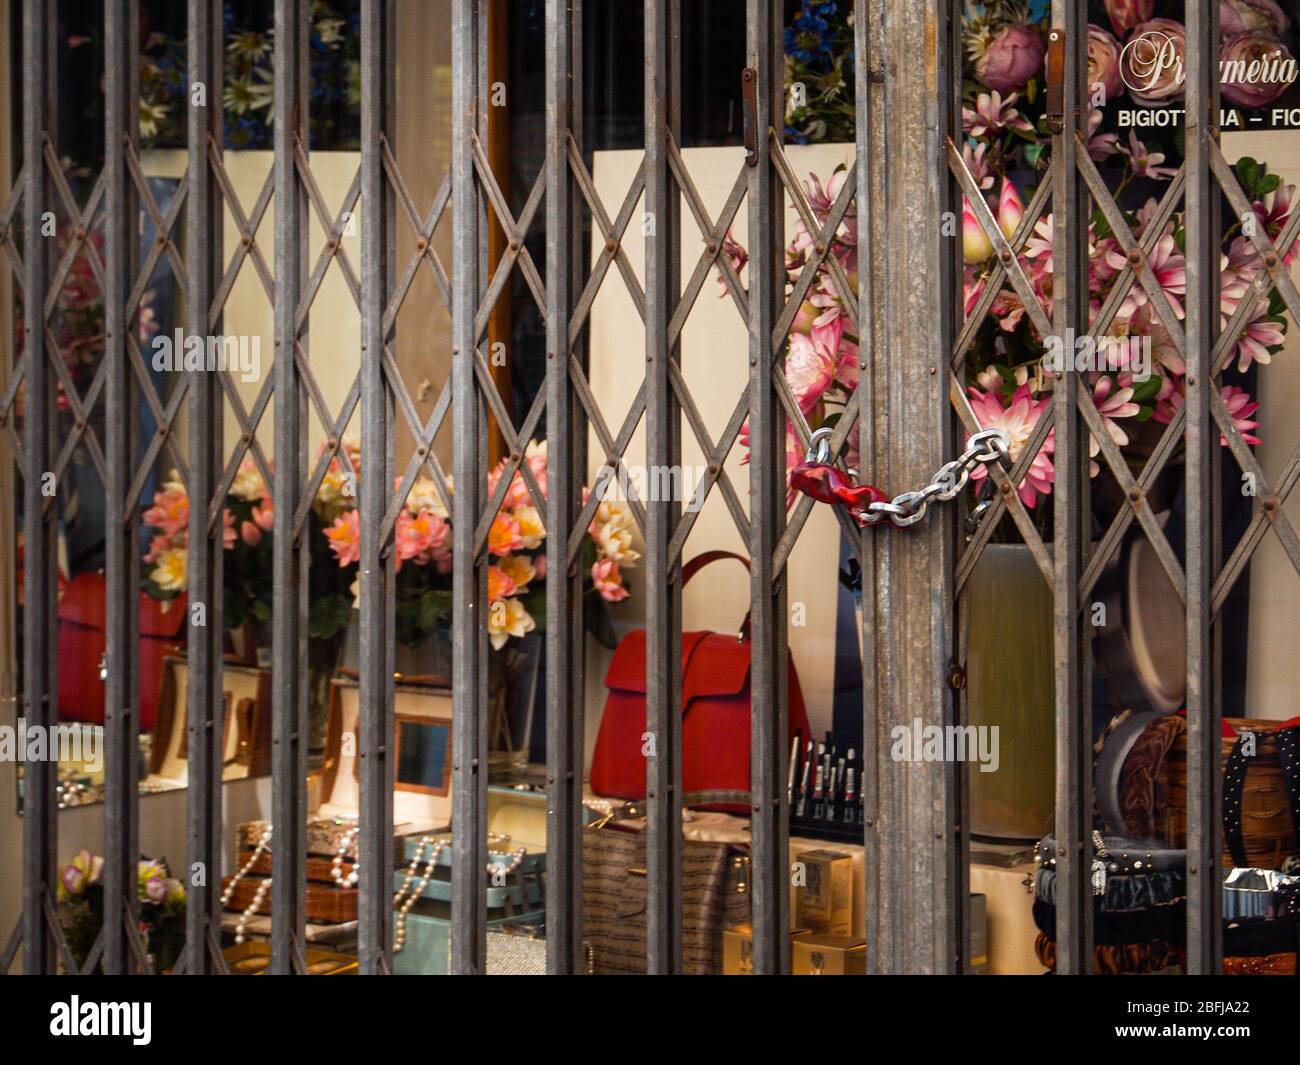 Cremona, Lombardy, Italy - April 19th 2020 - closed shos and stores , everyday life during covid-19 lockdown outbreak Stock Photo